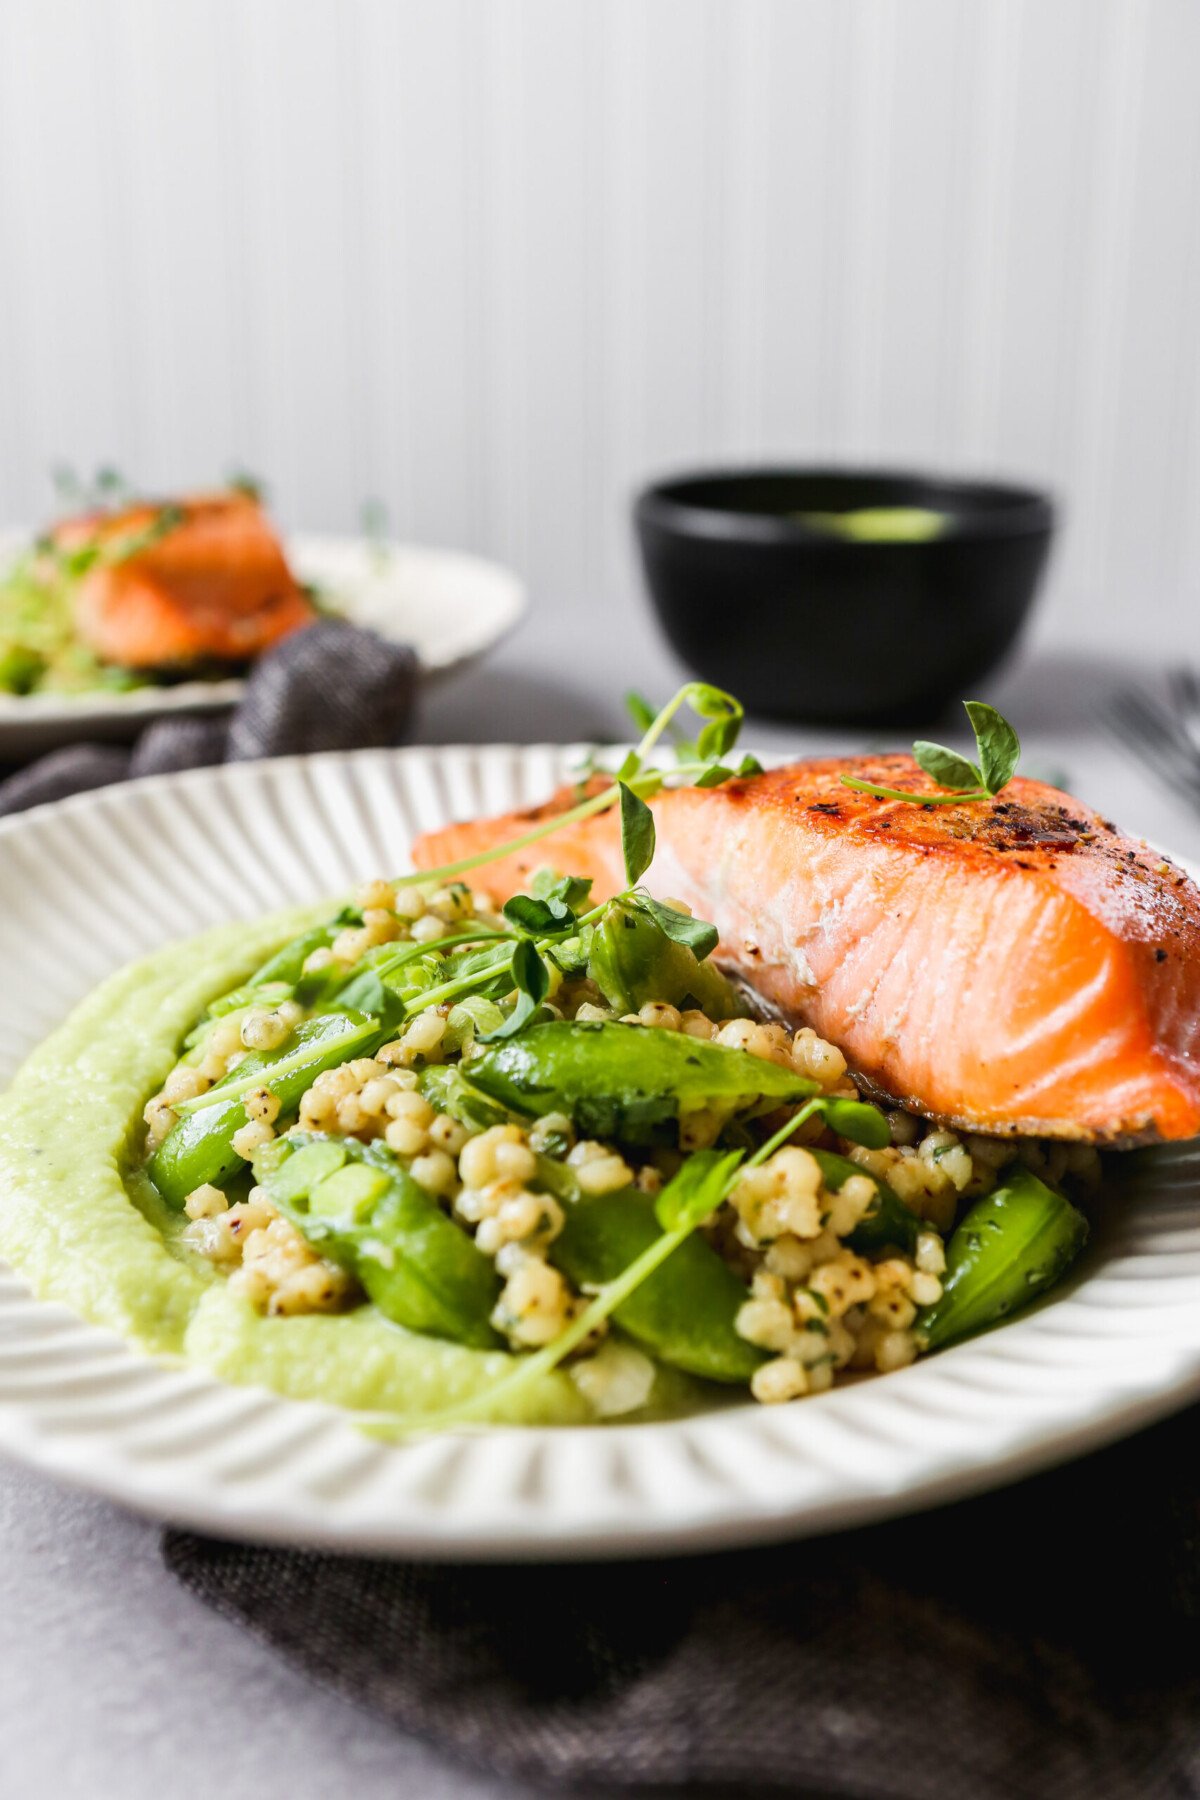 Seared salmon on white plates with green sauce and grain salad, set on a gray background.